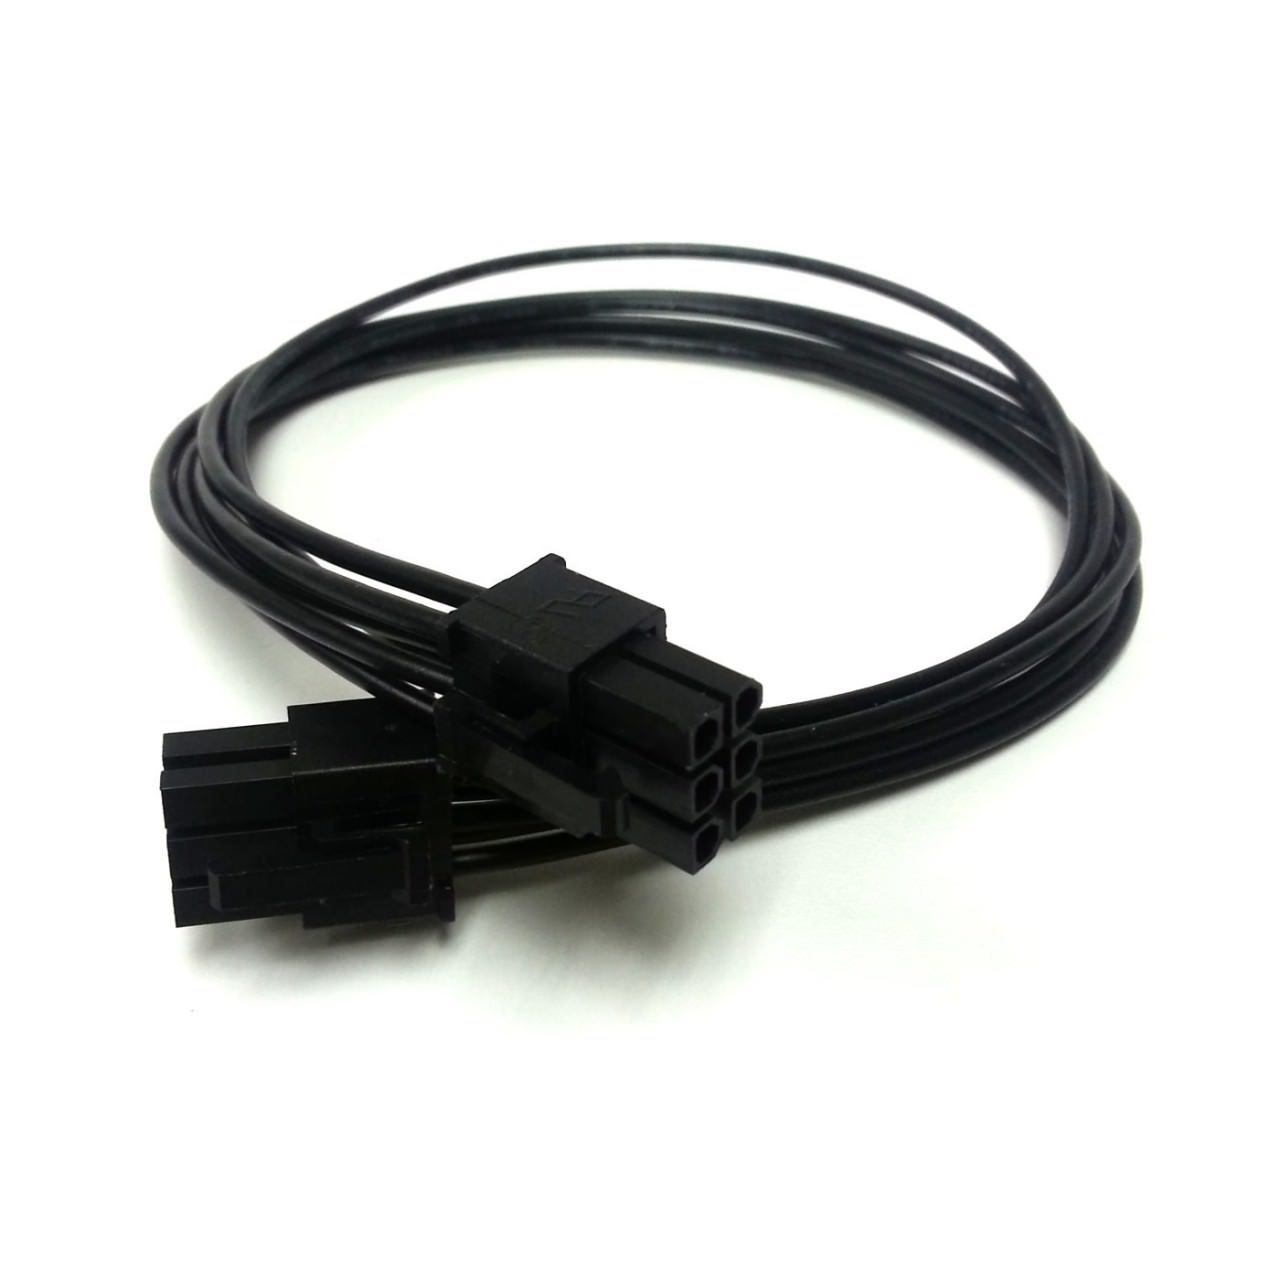 Plug multistage 6 PIN to 6/4 FILTRE ADSL